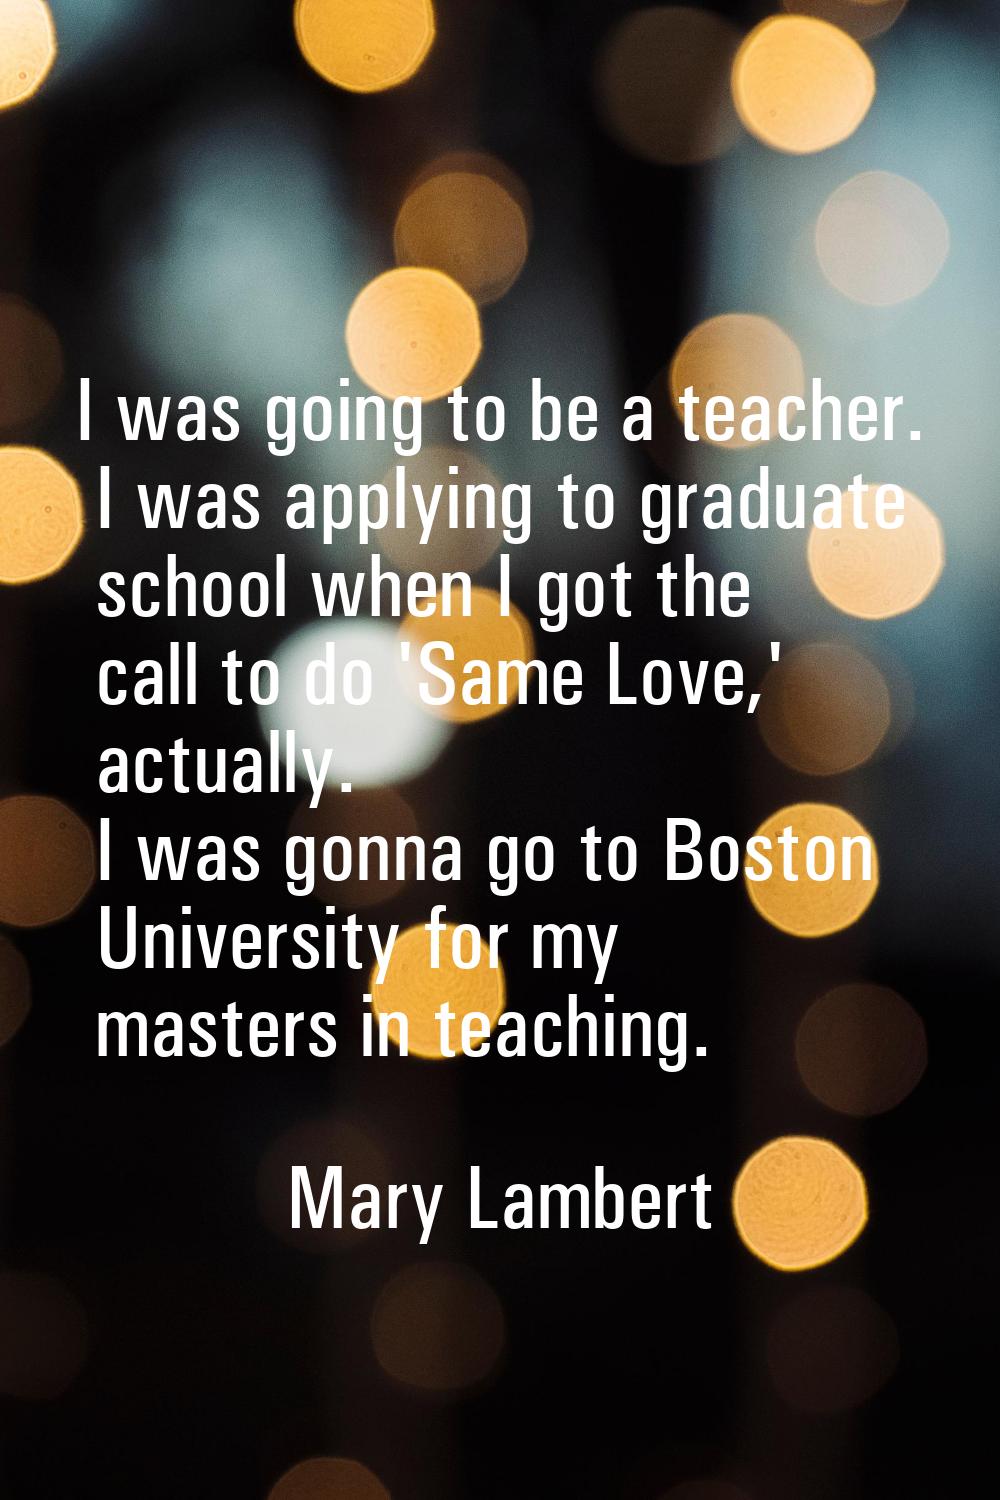 I was going to be a teacher. I was applying to graduate school when I got the call to do 'Same Love